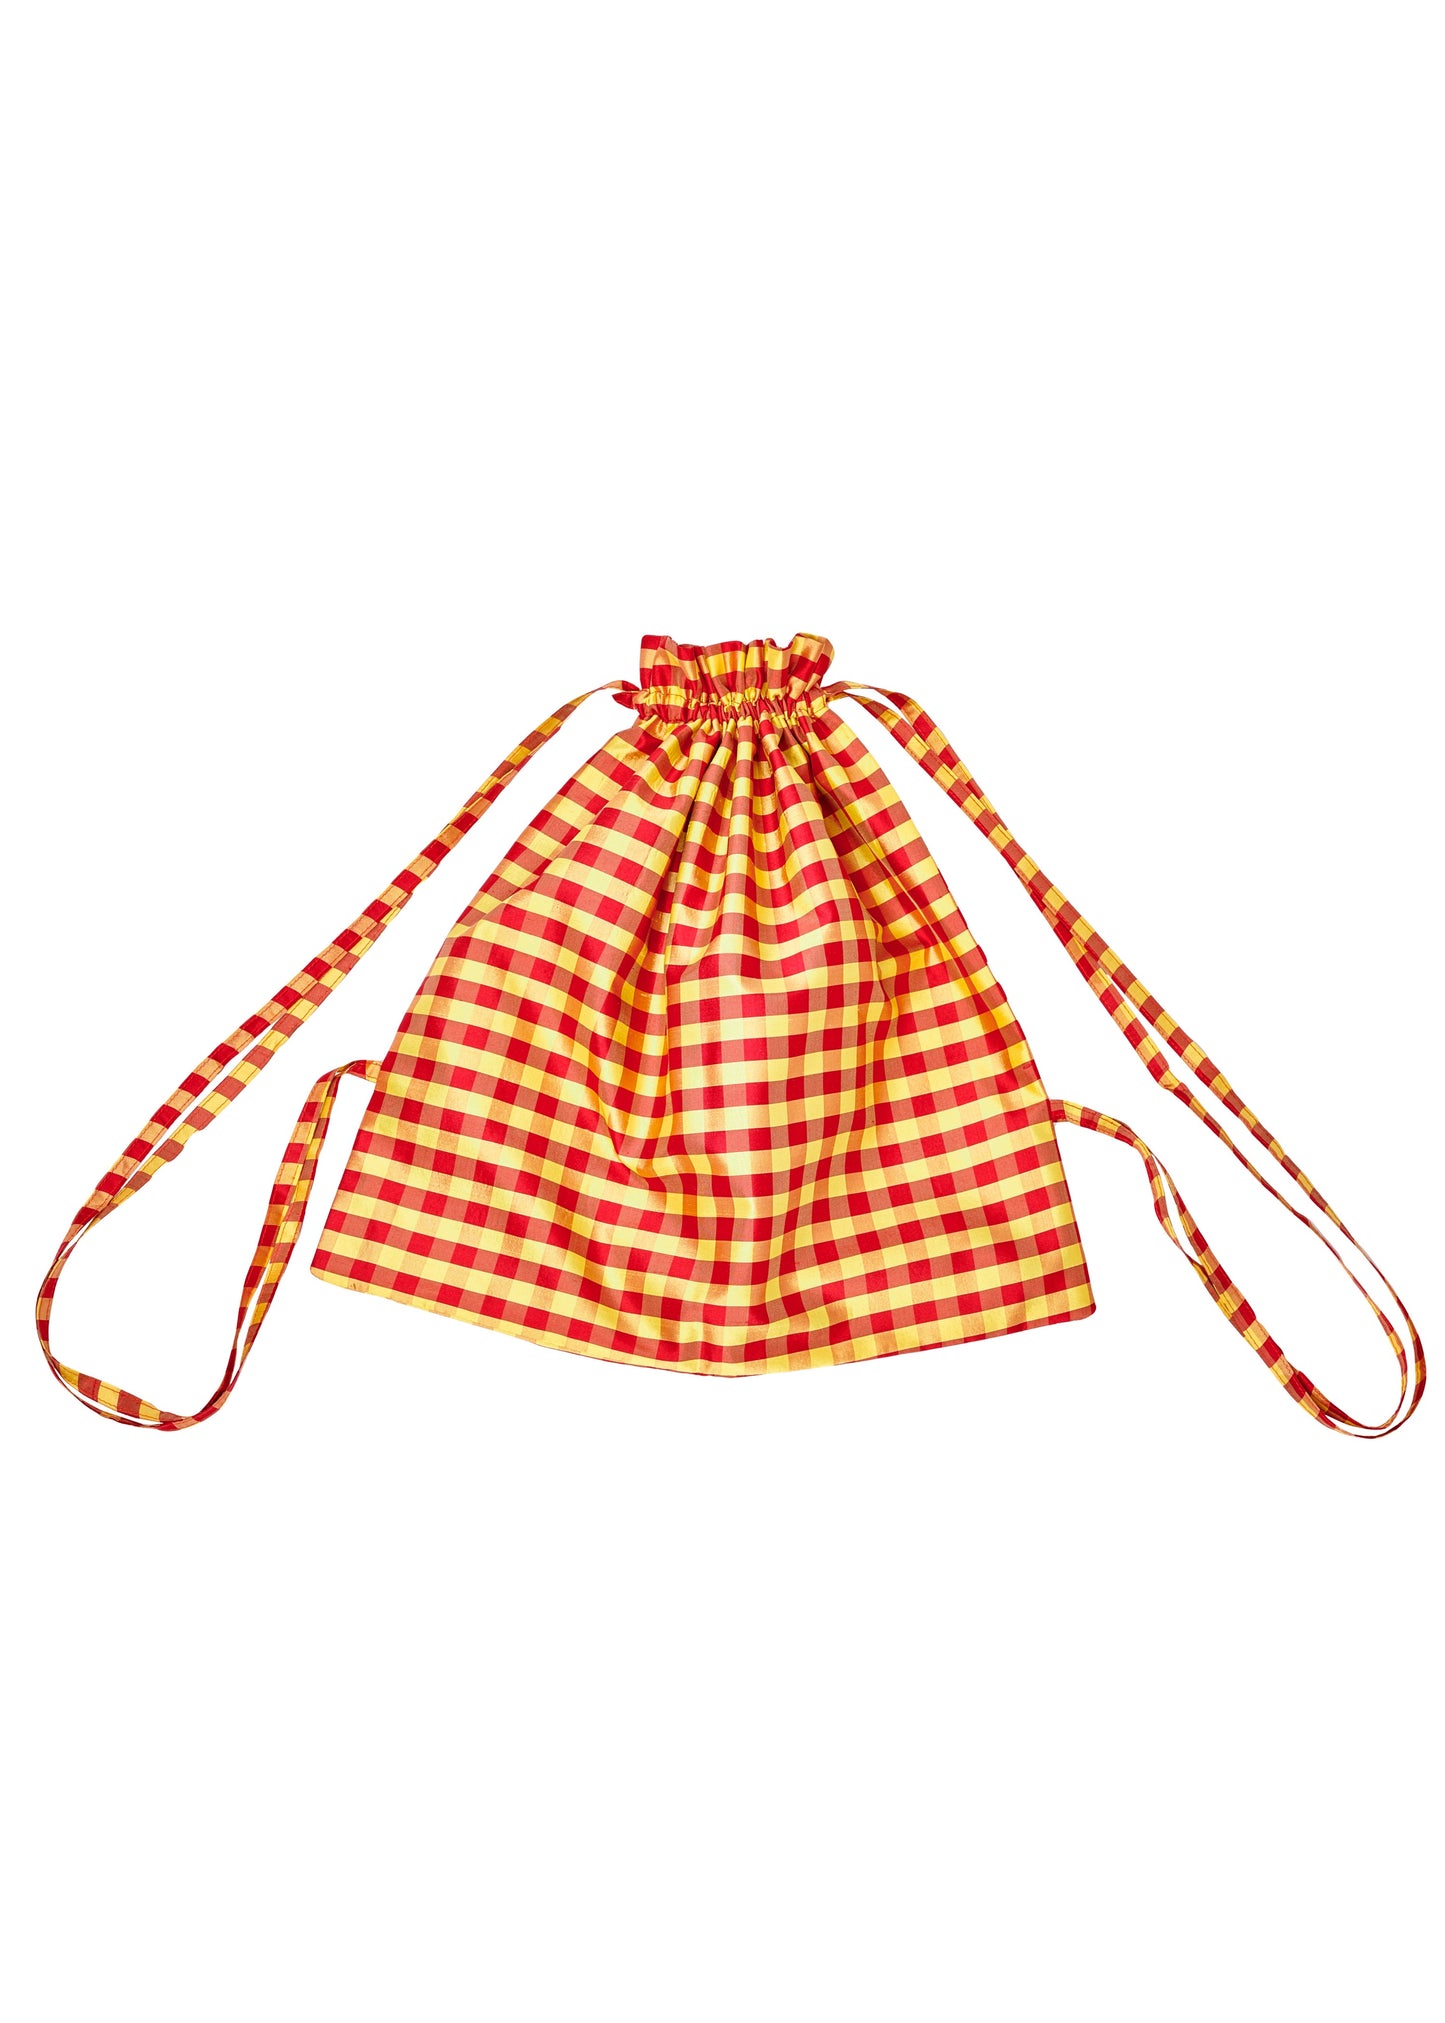 Gingham Red Yellow XL Drawstring Backpack